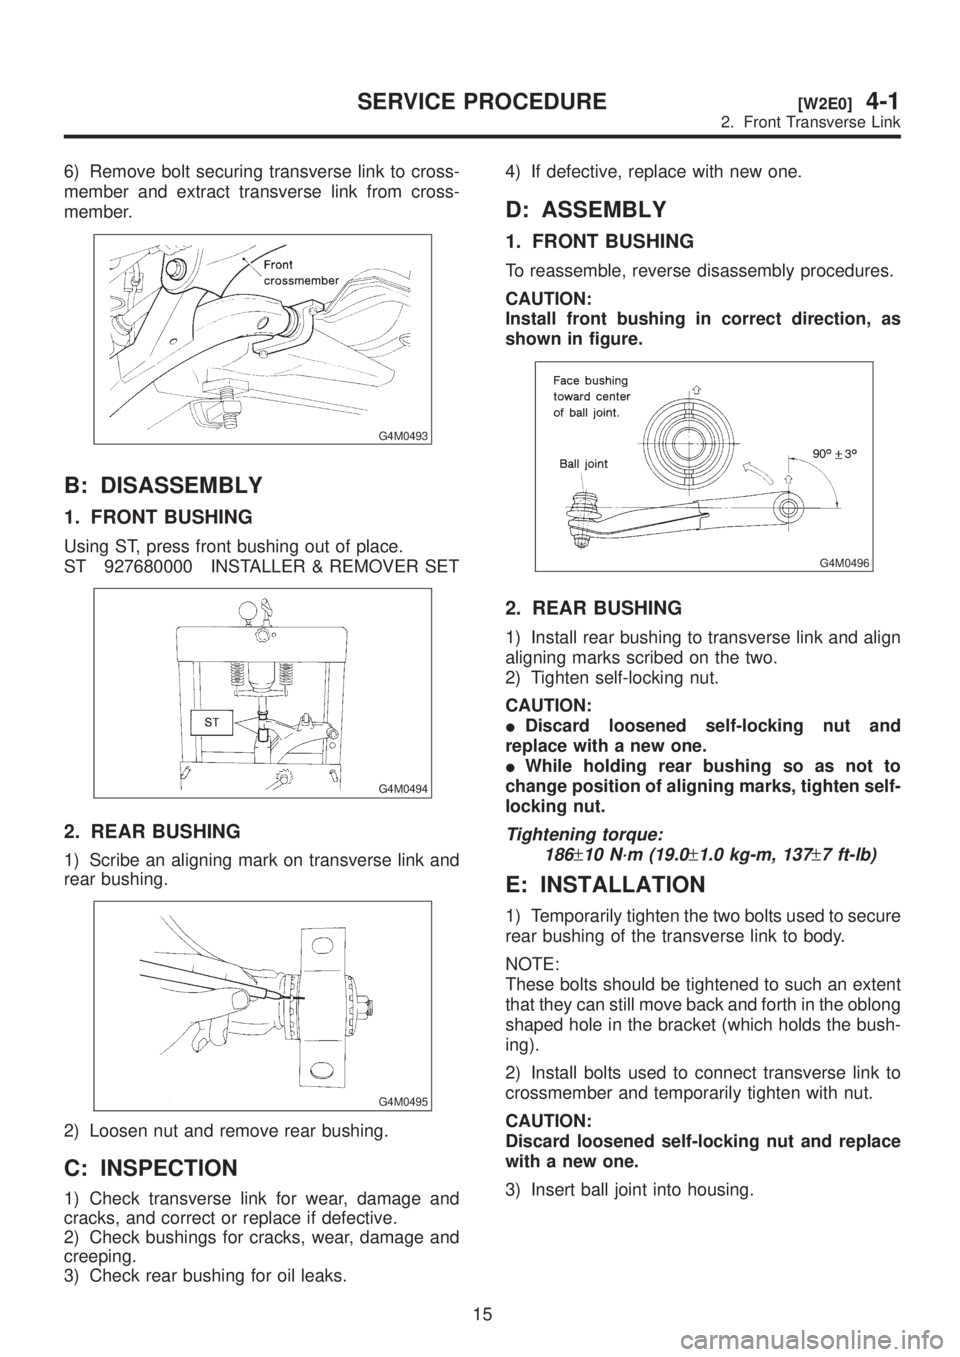 SUBARU LEGACY 1999  Service Repair Manual 6) Remove bolt securing transverse link to cross-
member and extract transverse link from cross-
member.
G4M0493
B: DISASSEMBLY
1. FRONT BUSHING
Using ST, press front bushing out of place.
ST 92768000